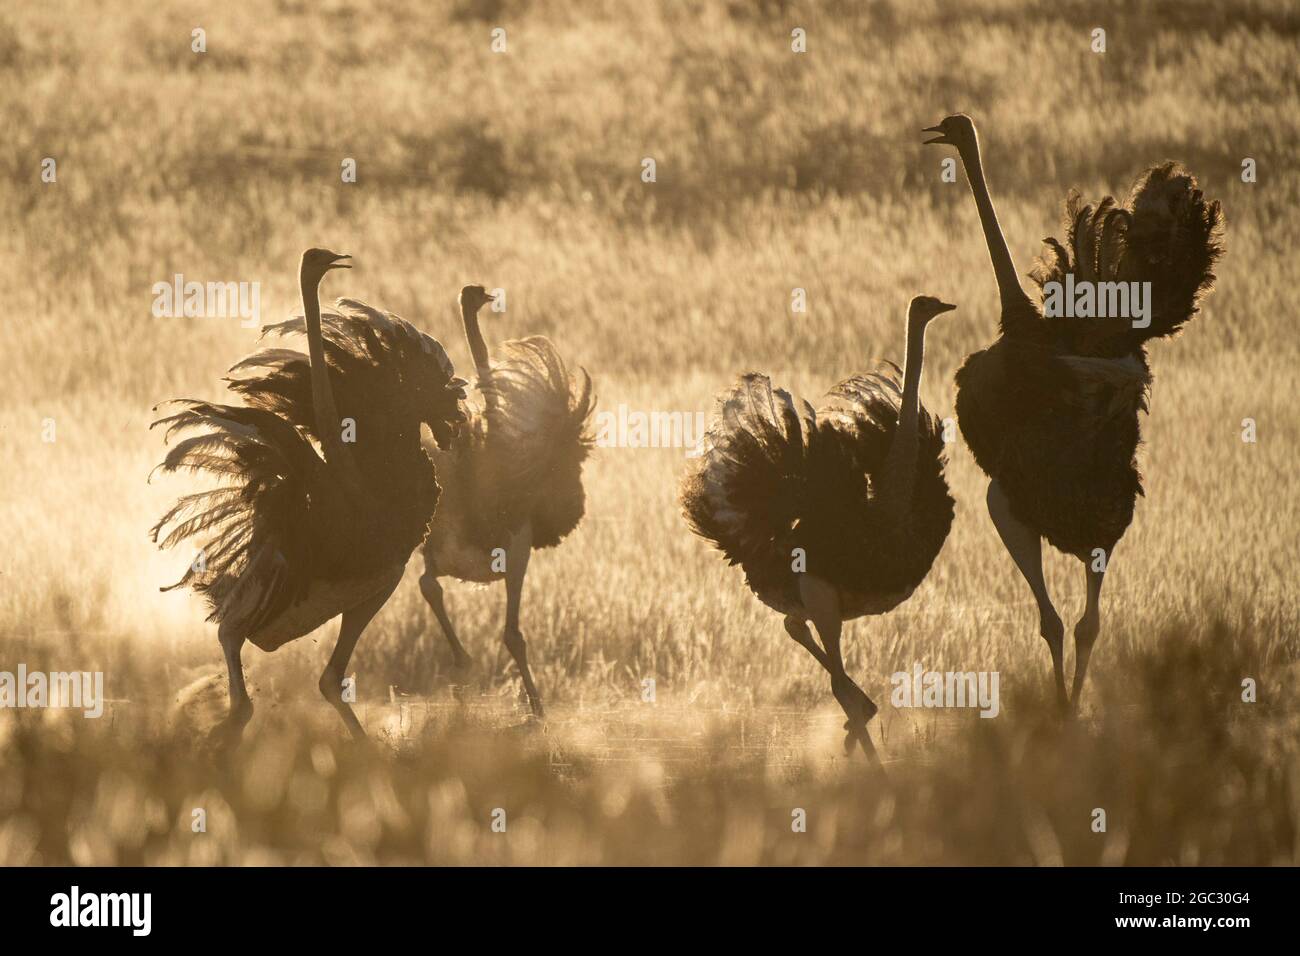 Common ostriches displaying, Struthio camelus, Kgalagadi Transfrontier Park, South Africa Stock Photo